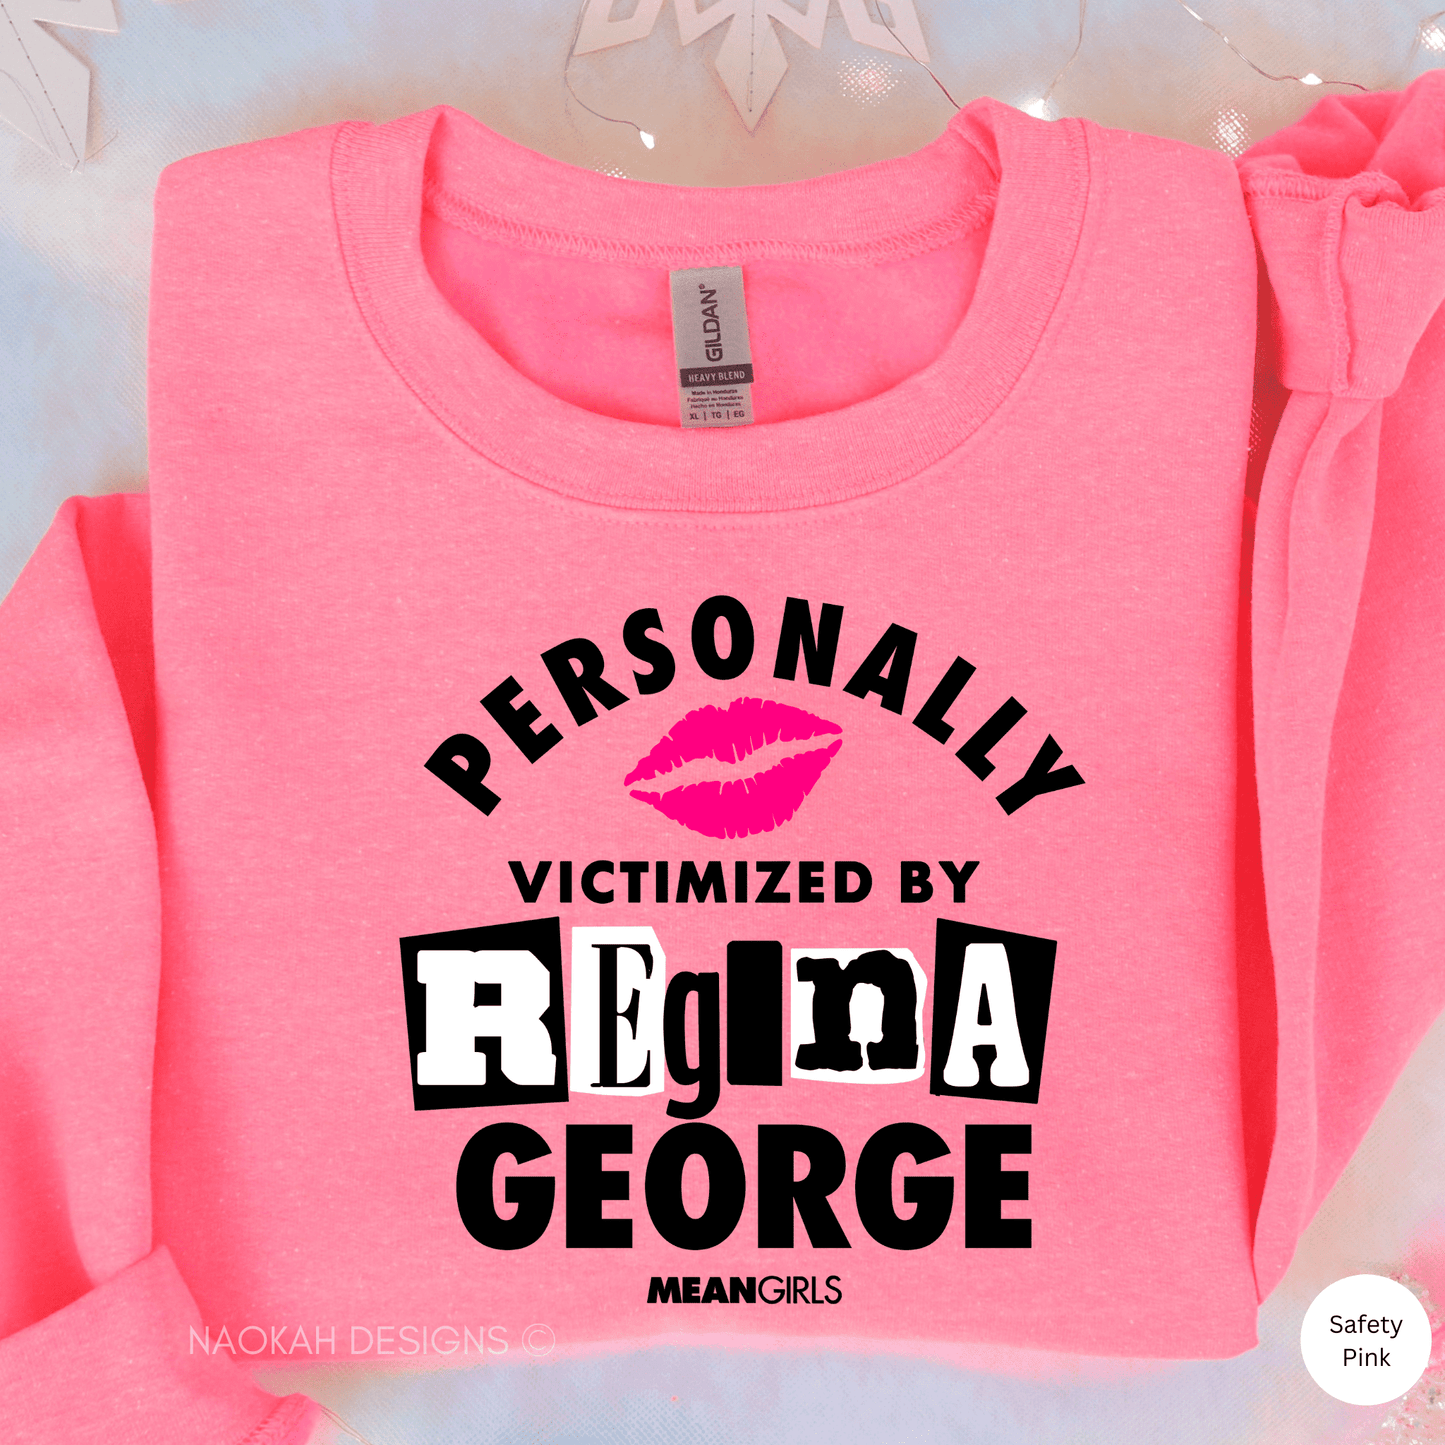 personally victimized by regina george sweater, on wednesdays we wear pink, that's so fetch, burn book, we wear pink, you're like really pretty 